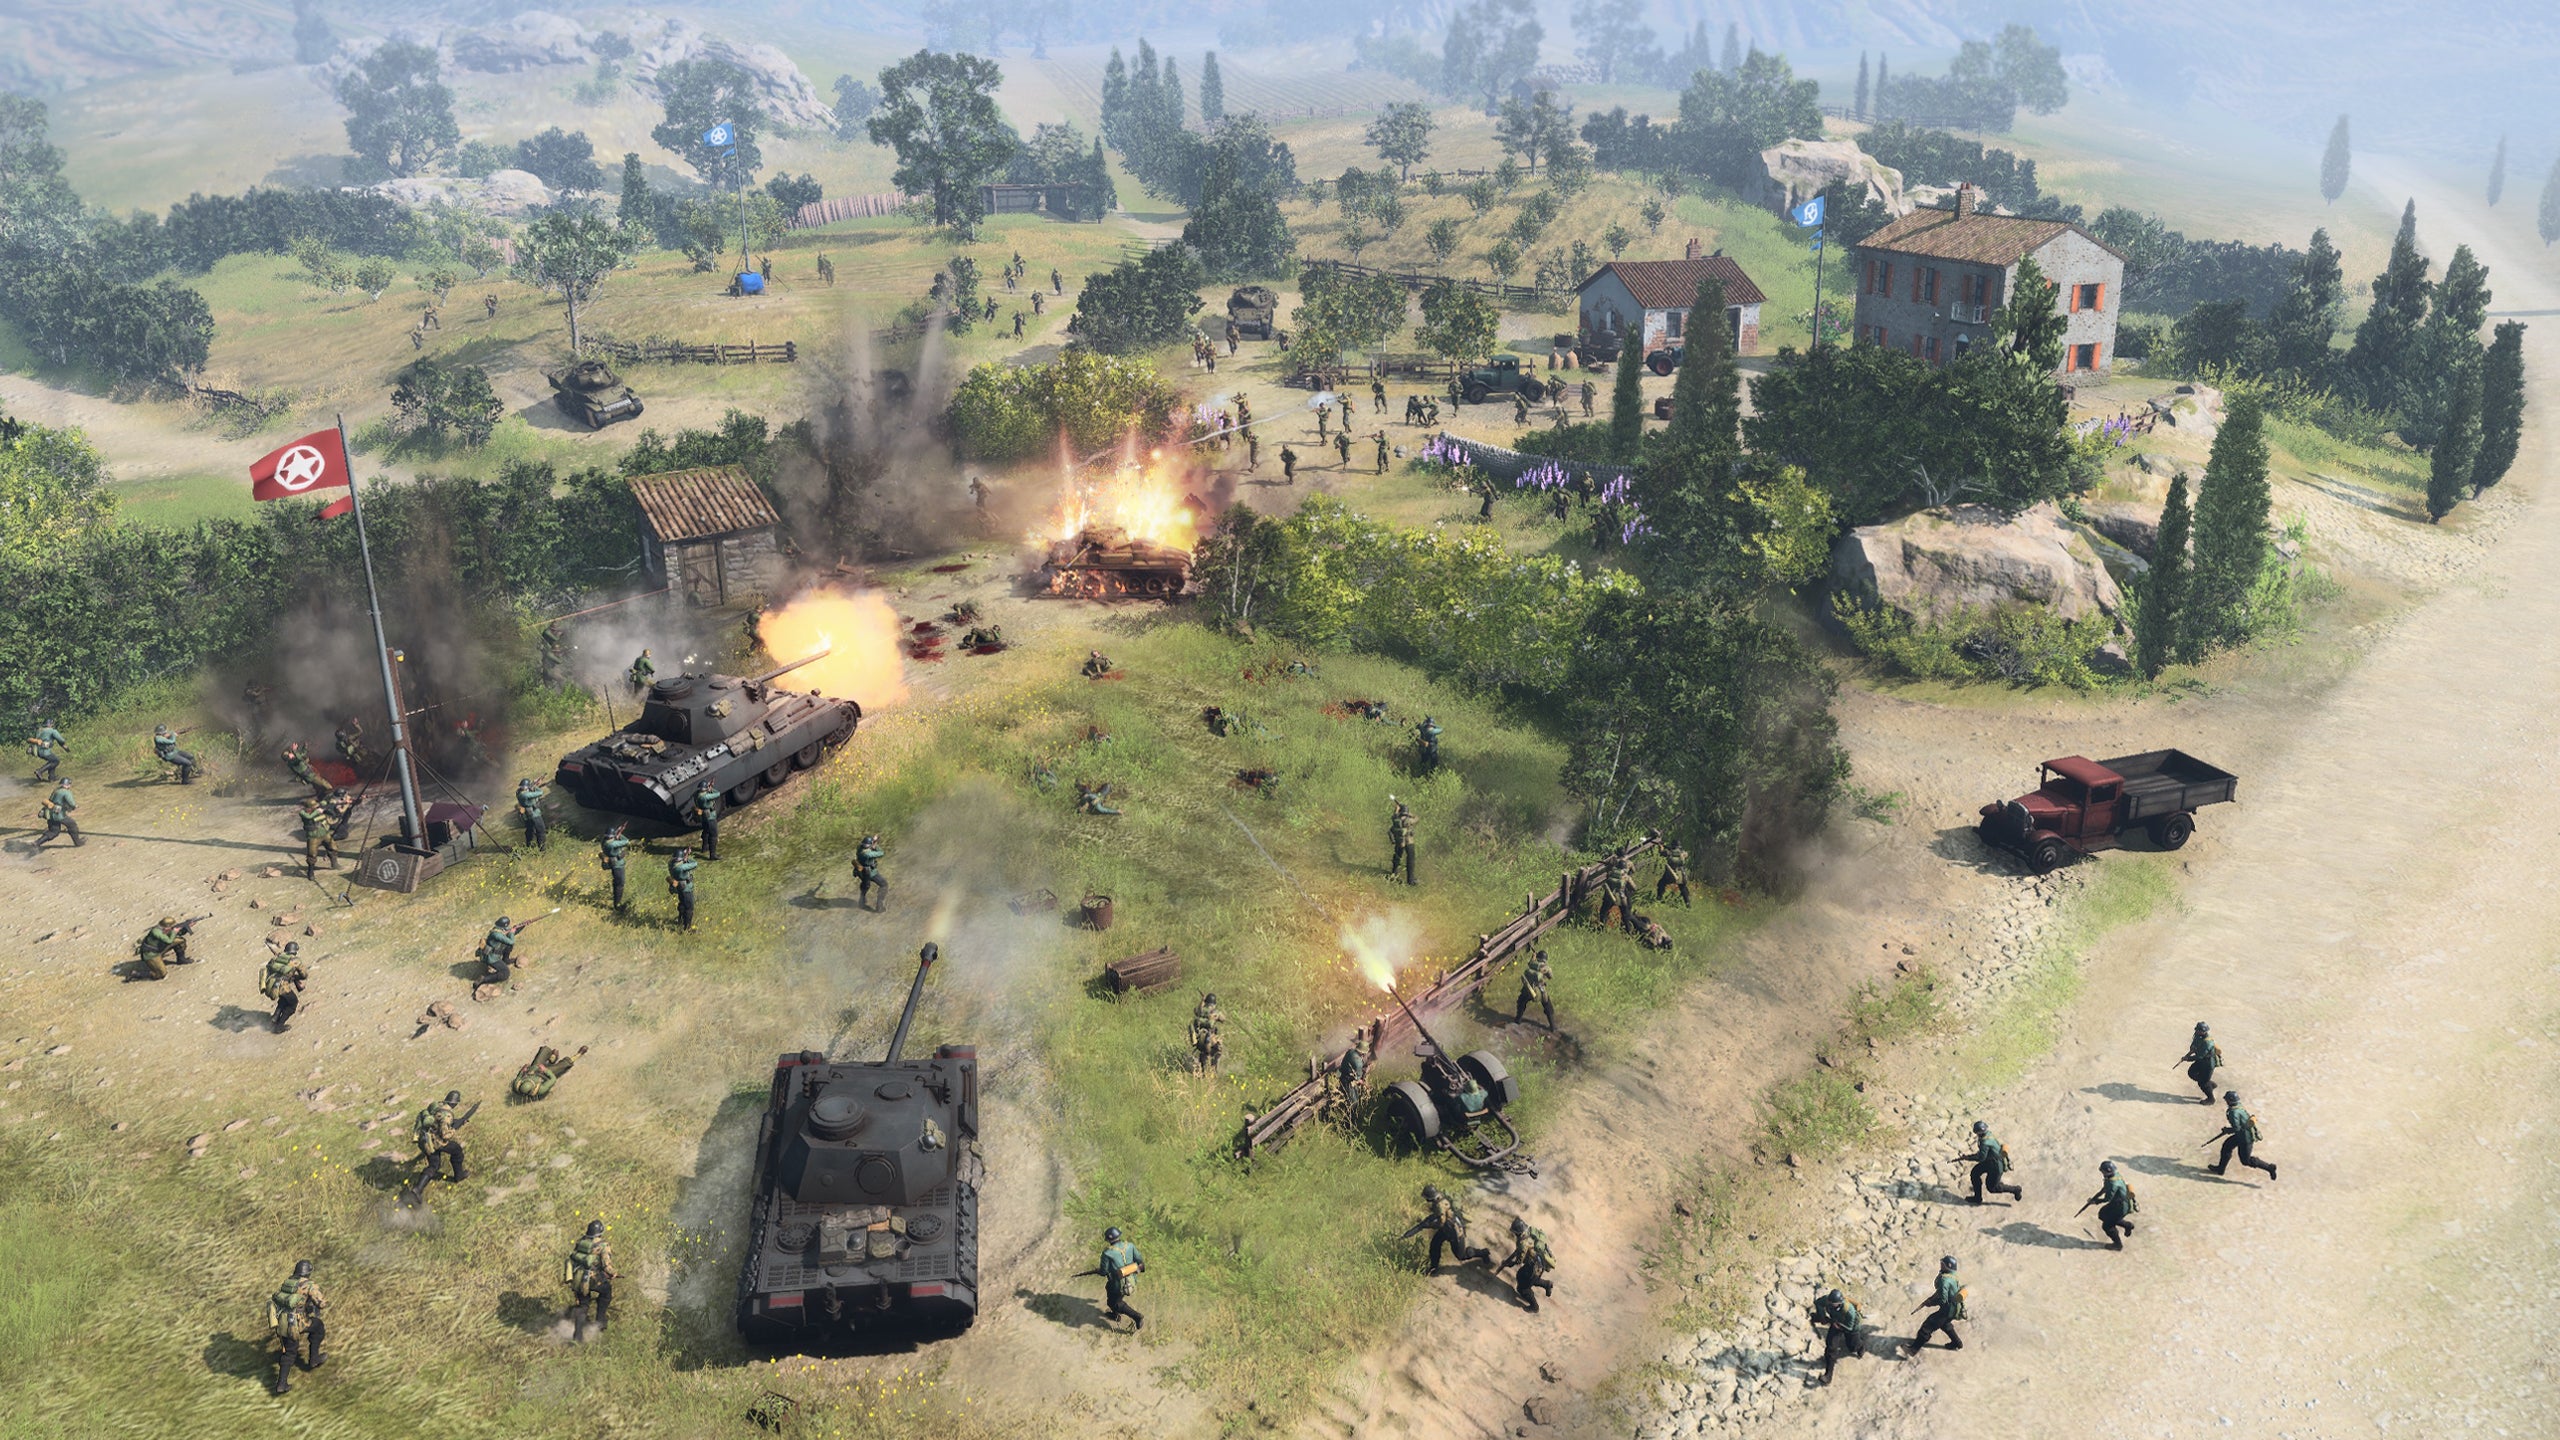 Explosive action in a Company of Heroes 3 multiplayer pre-alpha screenshot.